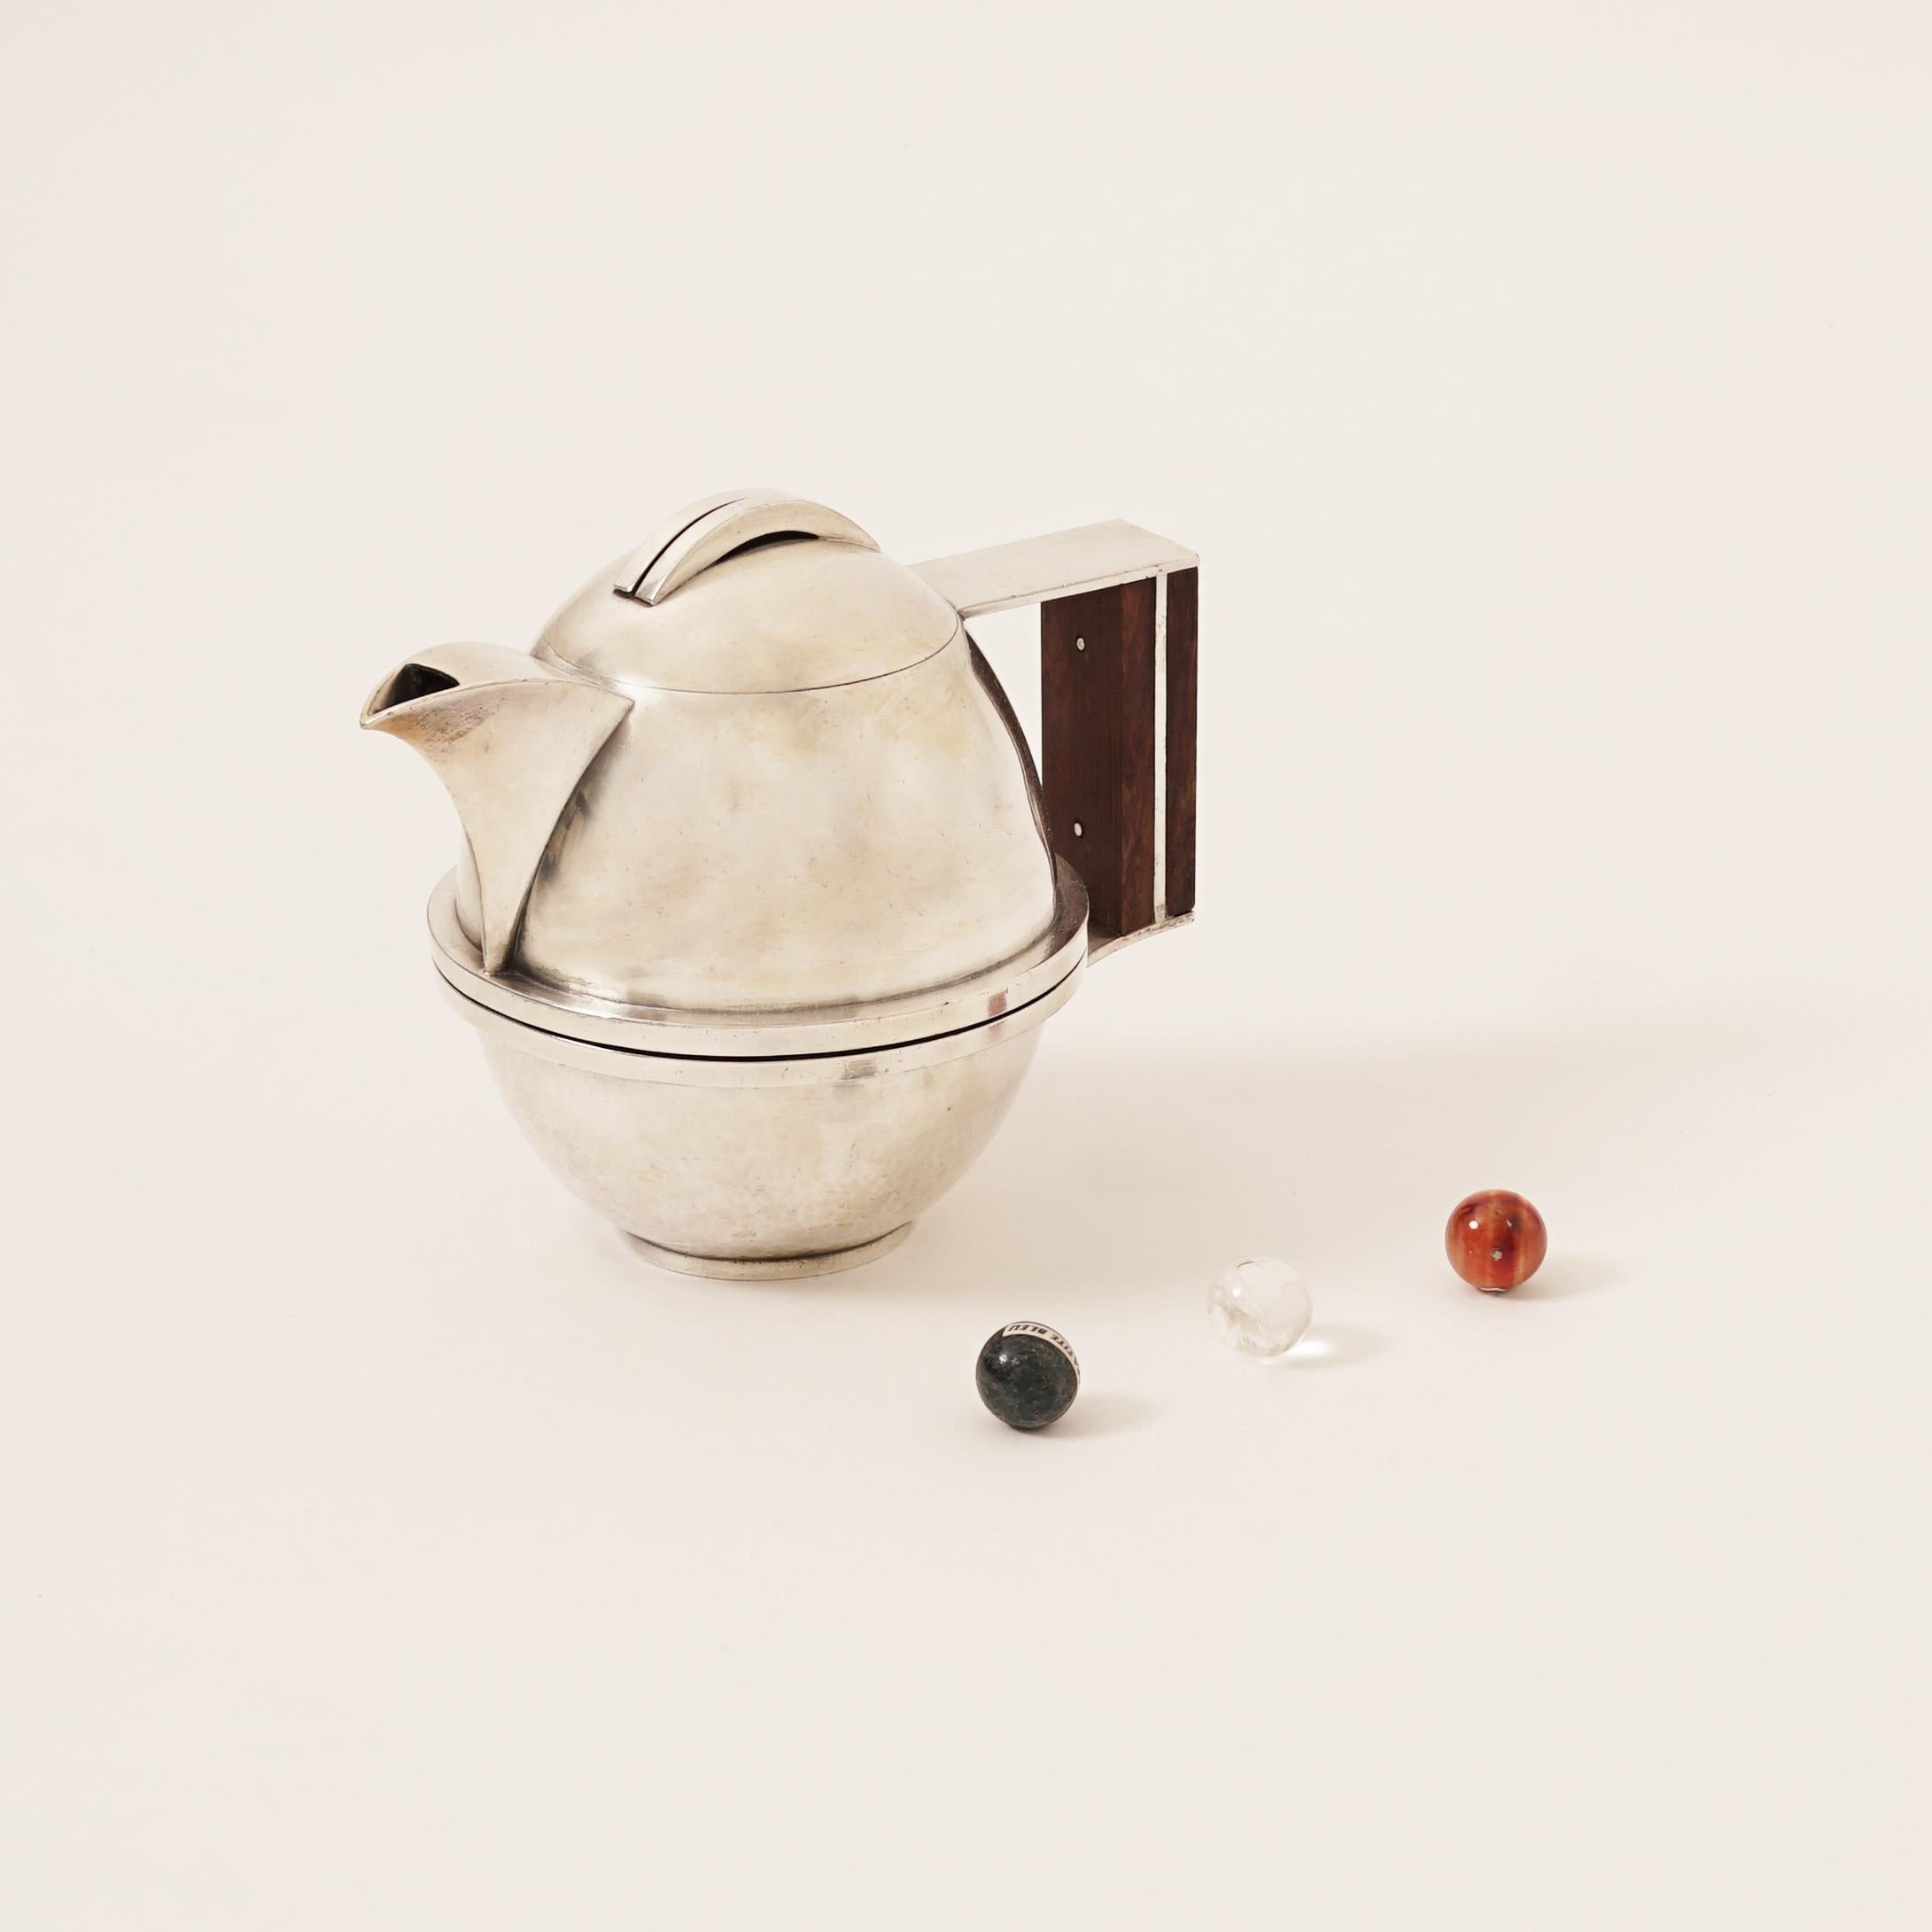 Jean Despres (1889-1980)
Tea-Pot, circa 1930
Tin, base in hammered Tin, animated with spherical stipes and angular Madagascar Ebony Wood handle. Spherical Hinged cover with two silver stripes. 
Signature incised 